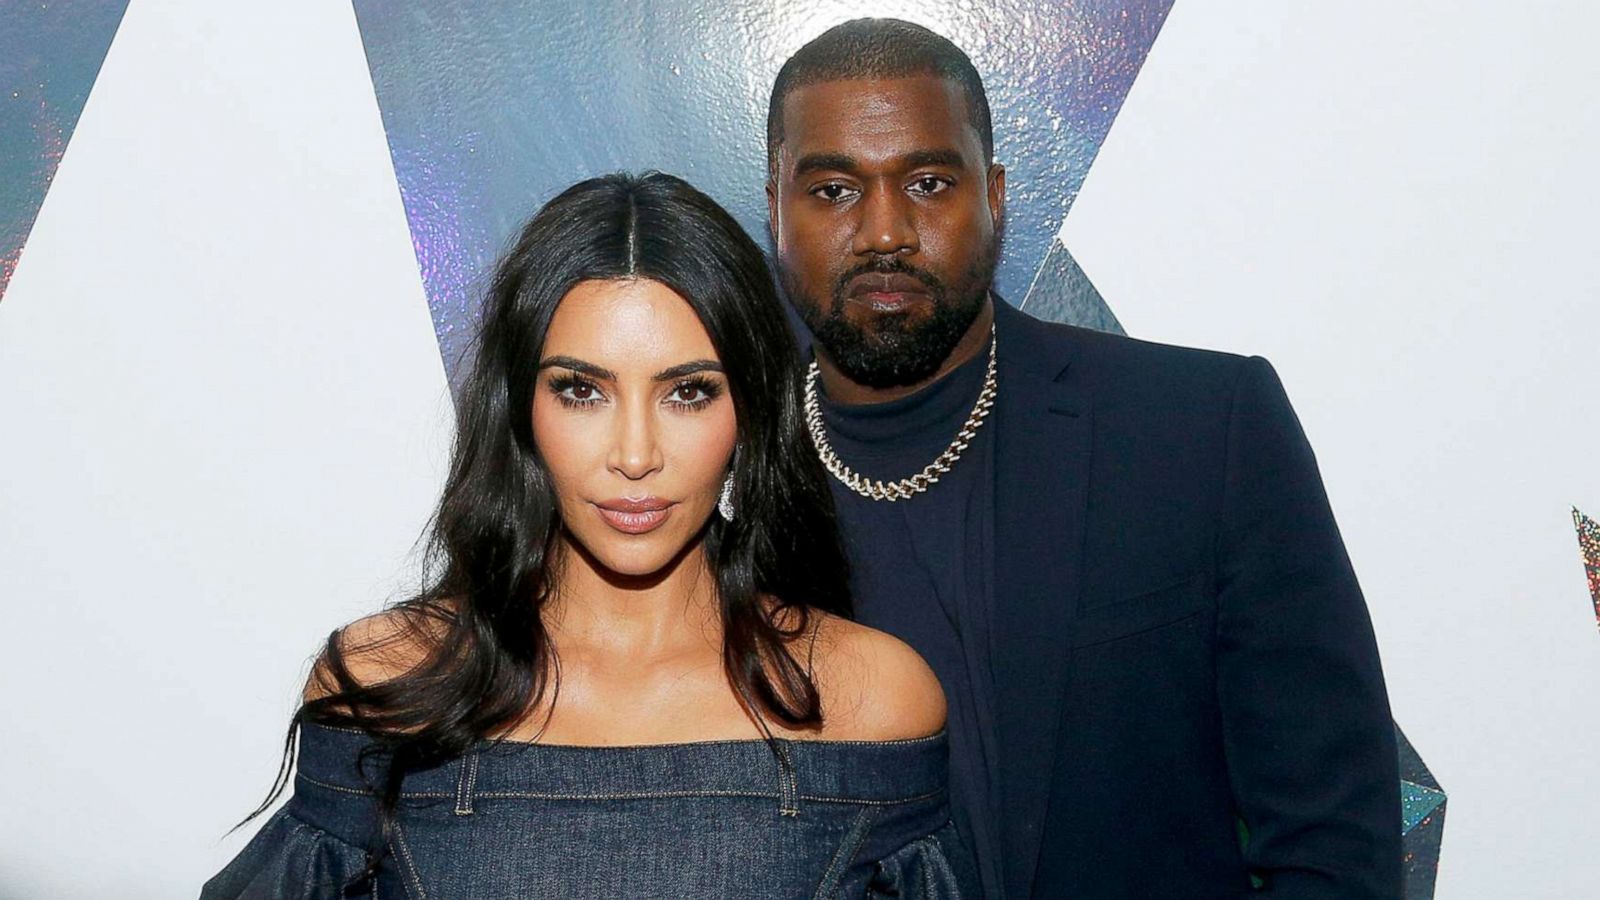 What to know about the Kim Kardashian and Kanye West divorce